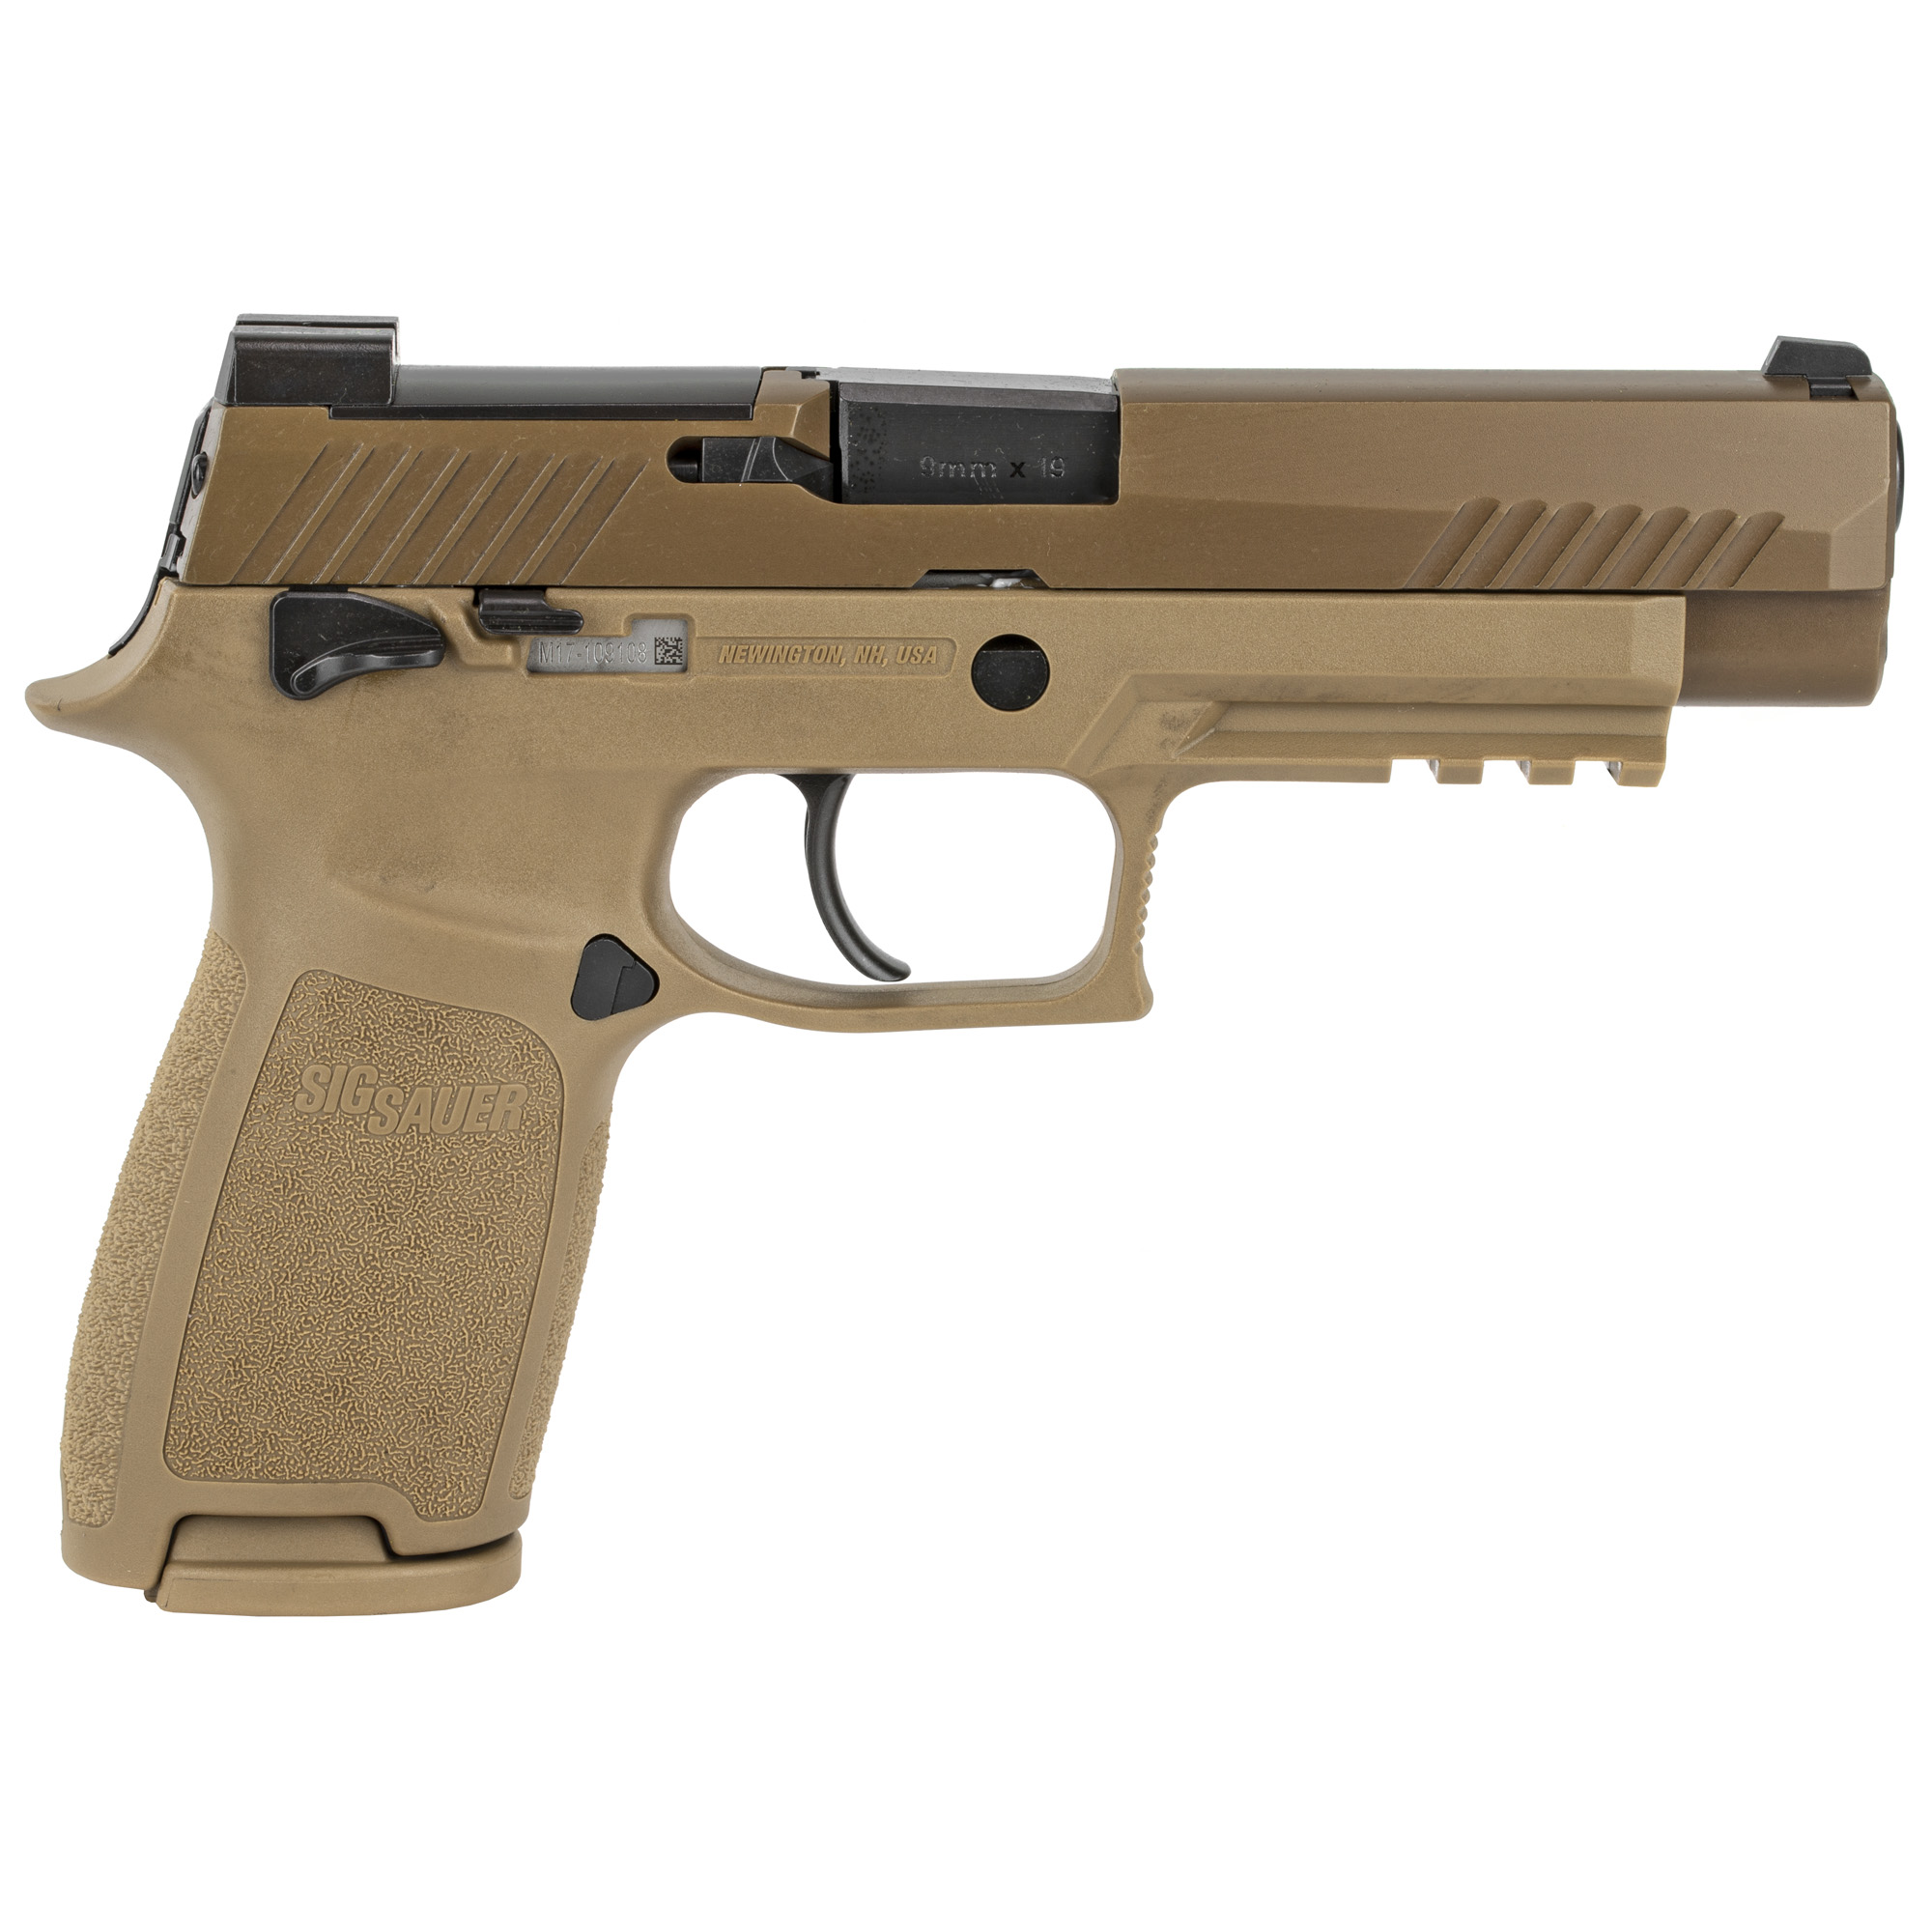 SIG Sauer P320-M17 Full Size, Semi Auto Pistol 9mm, 4.7" Barrel, 17/21 Rounds, SIGLITE Sights, Manual Safety, Coyote Tan, MPN #